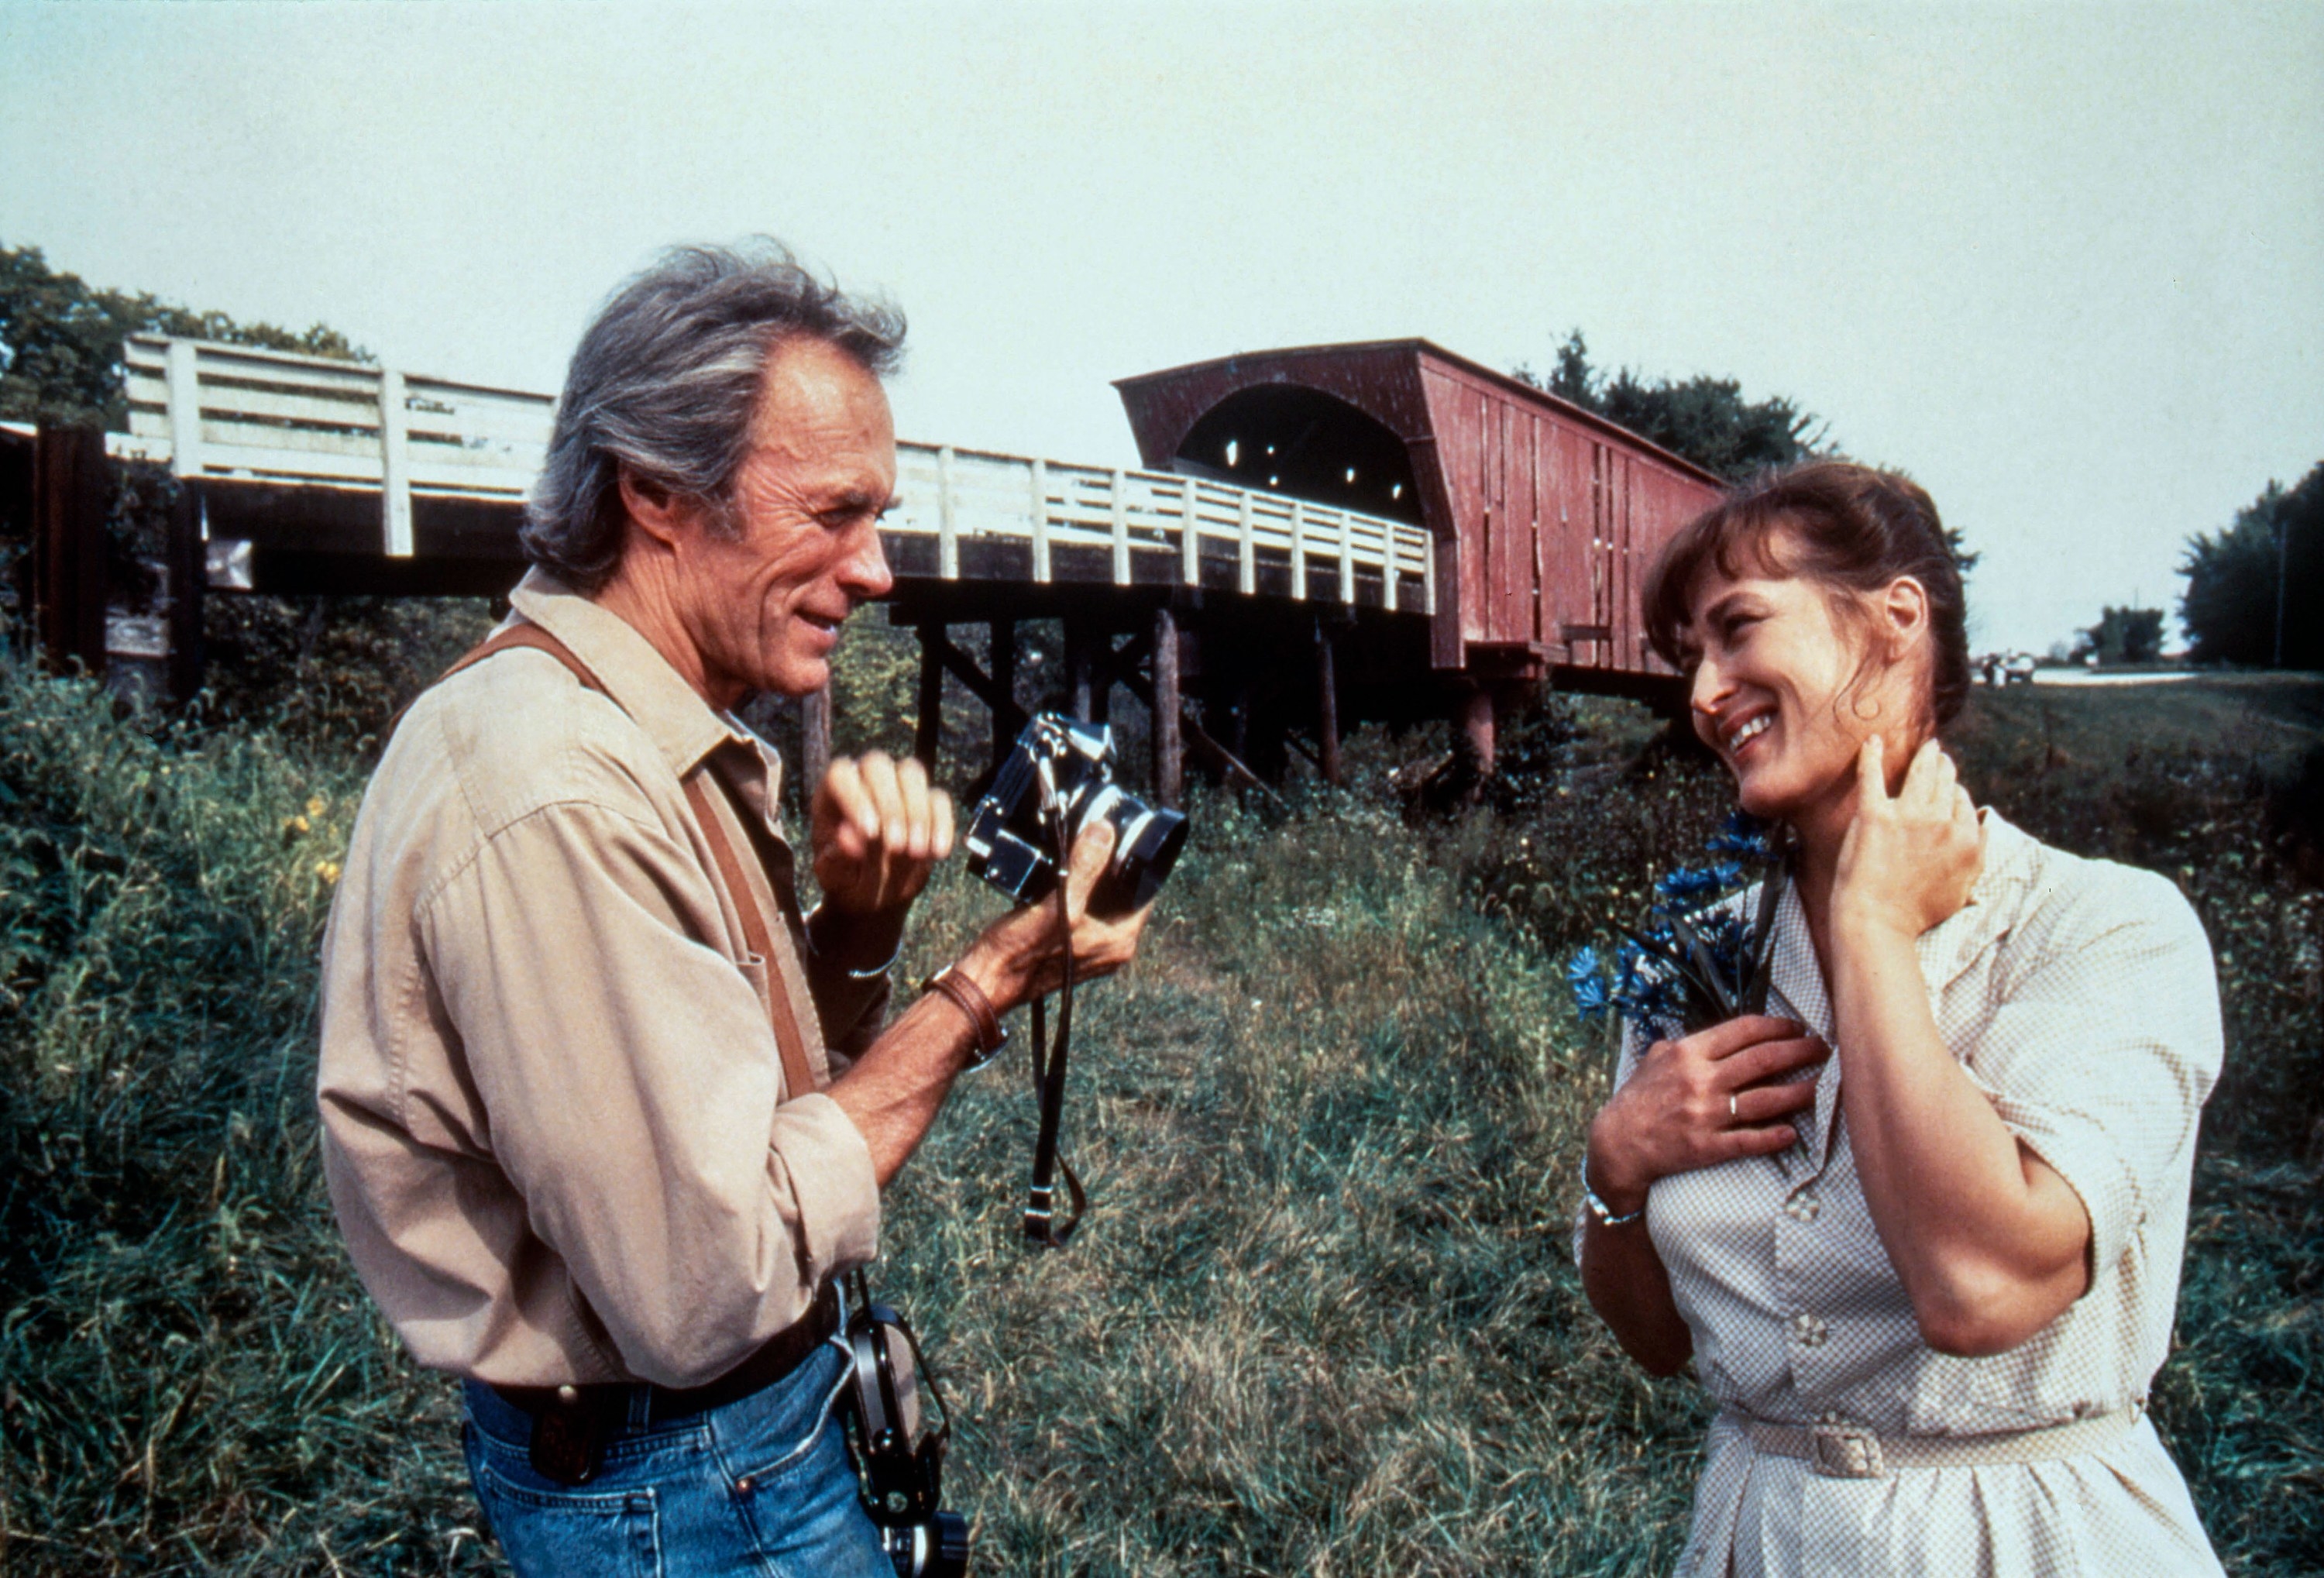 Clint holding a camera and smiling at Meryl